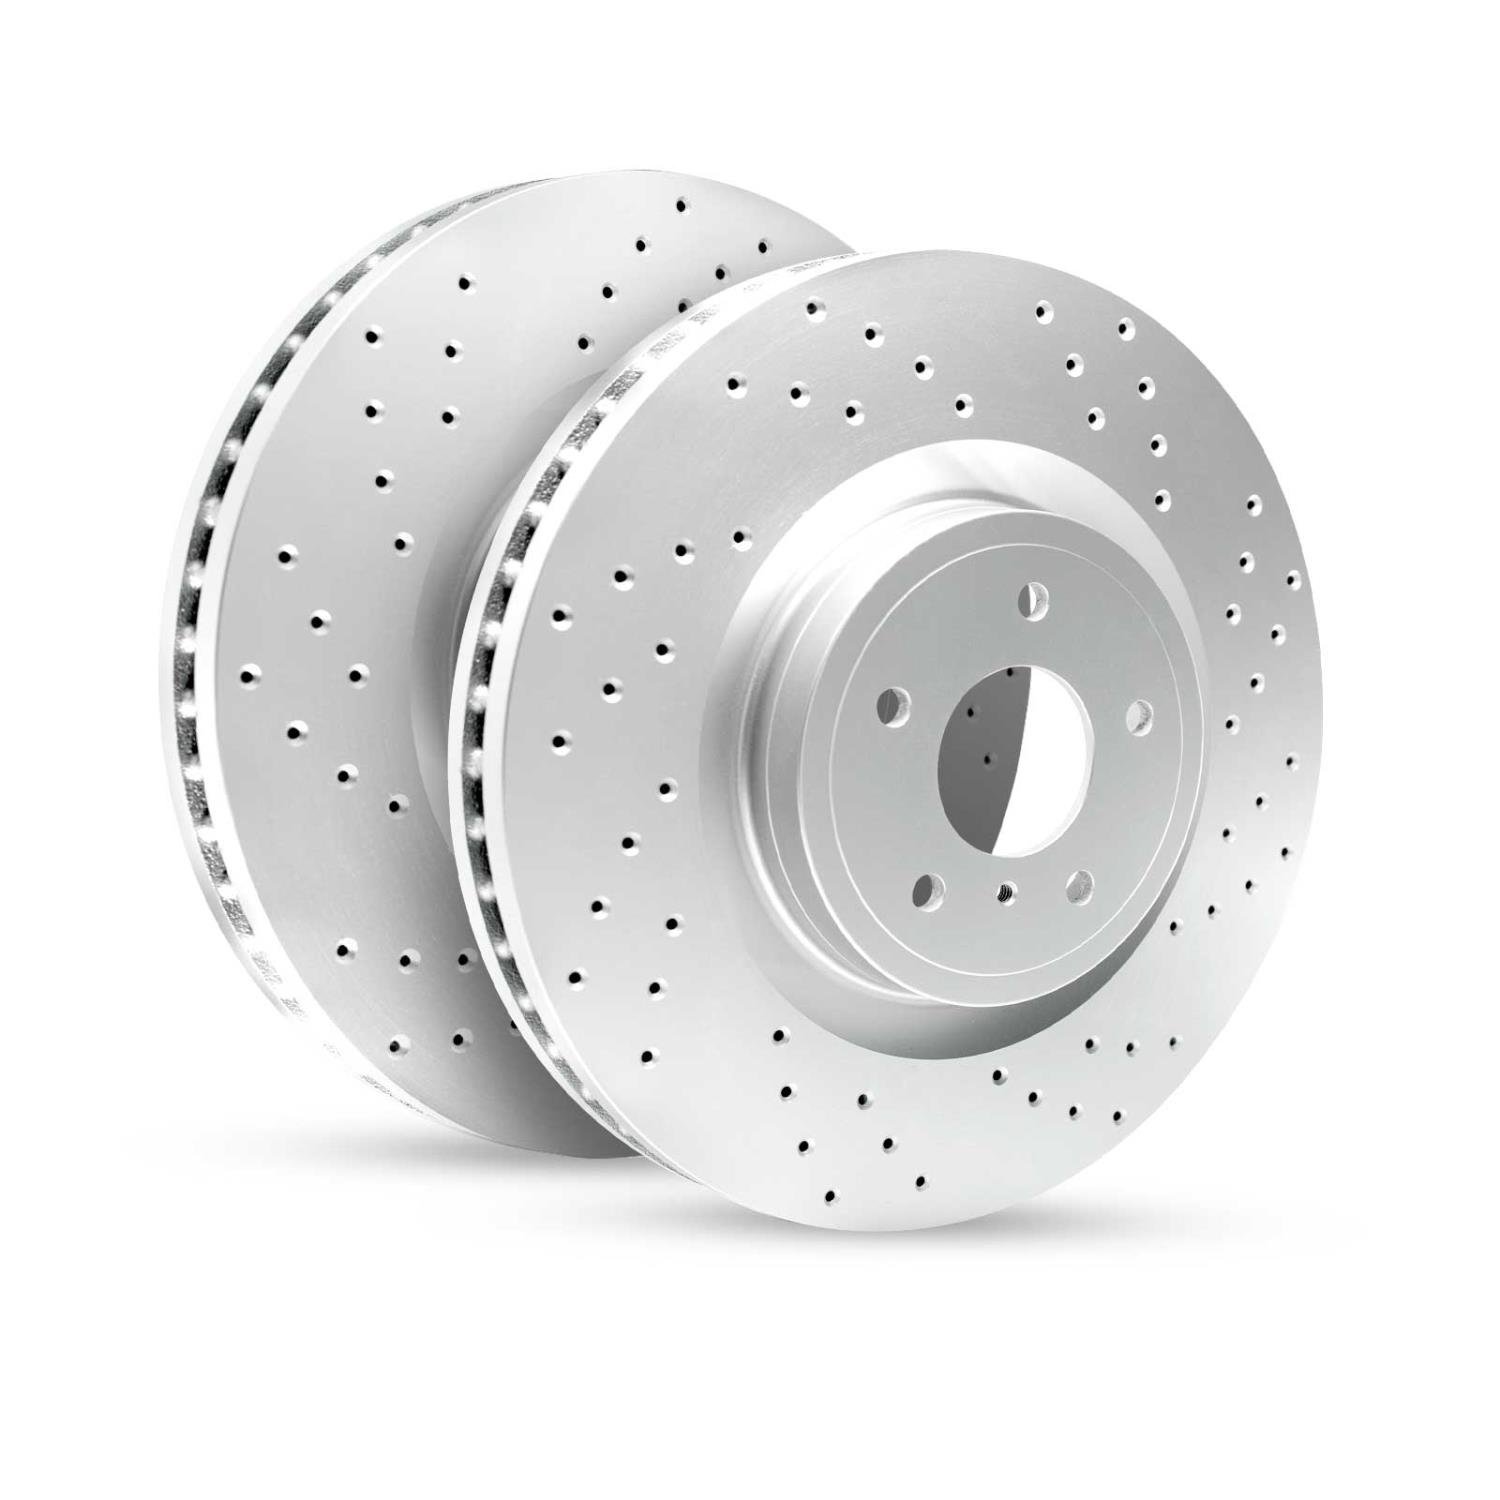 GEO-Carbon Drilled/Slotted Rotors, 2010-2017 Land Rover,